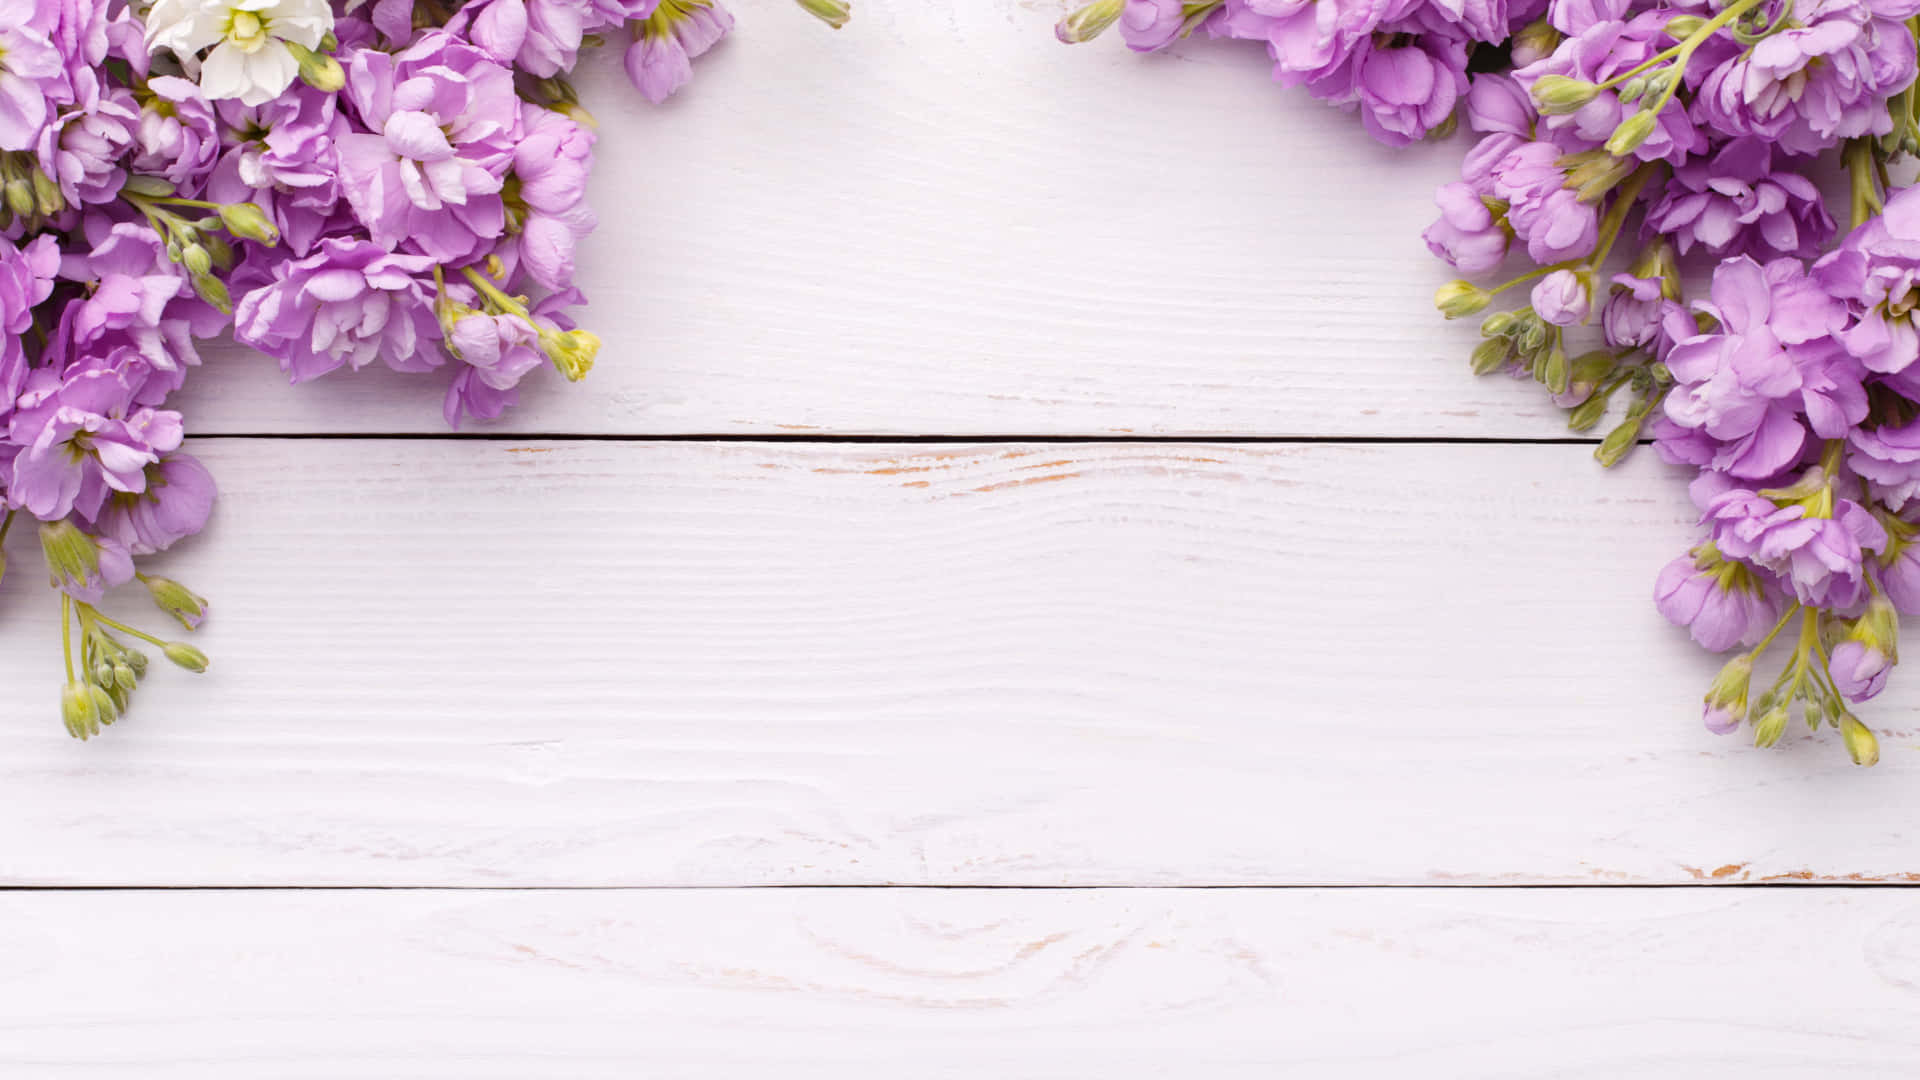 Purple Floral Frame White Wooden Background Wallpaper